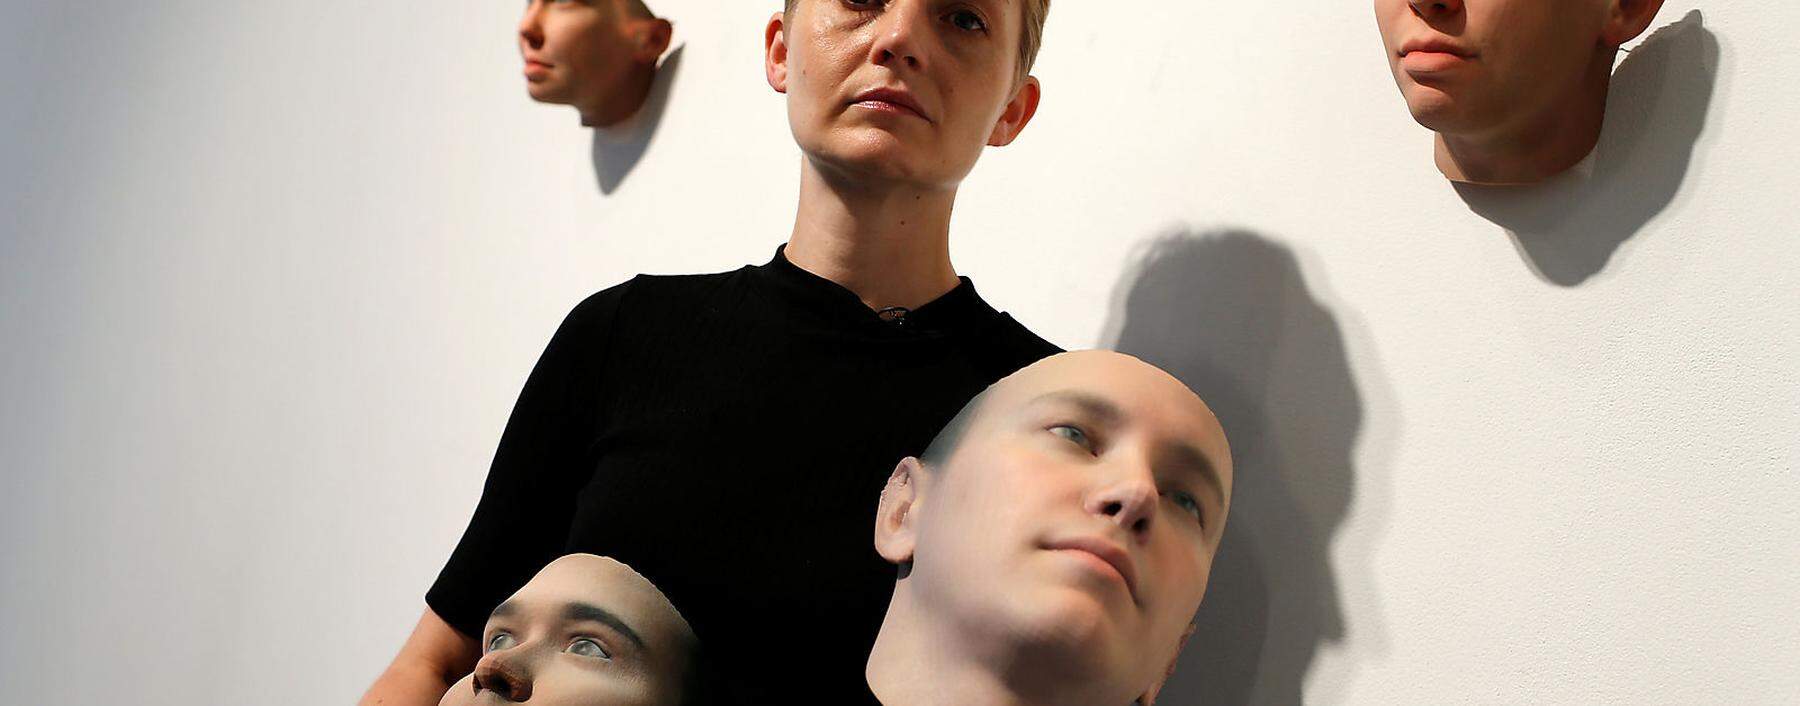 Artist Heather Dewey-Hagborg poses with various 3-D printed masks at the Fridman gallery in New York City